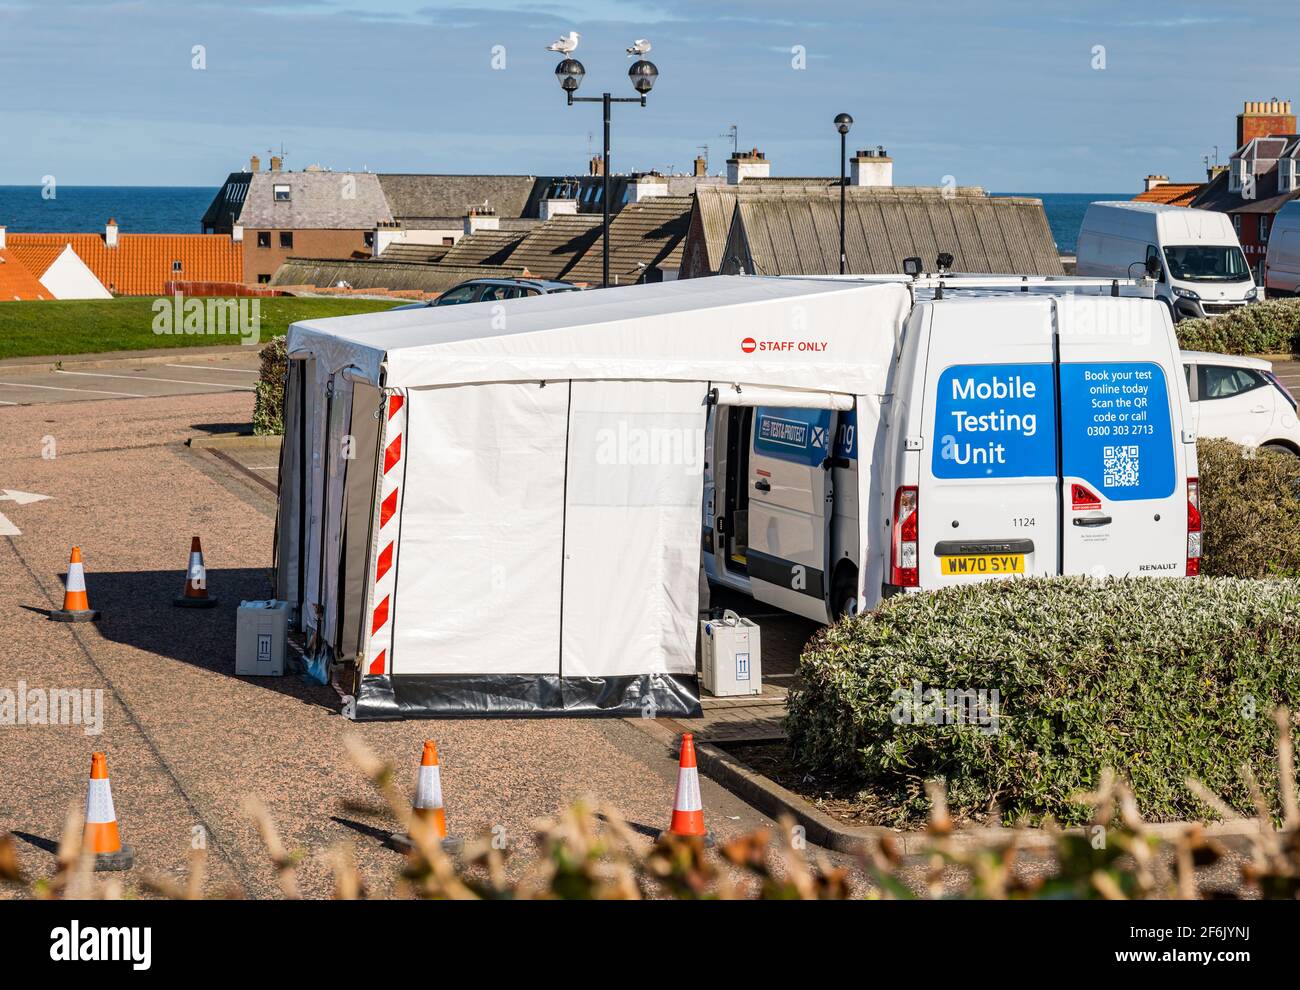 Dunbar, East Lothian, Scotland, United Kingdom. 1st Apr, 2021. Mobile asymptomatic Covid-19 testing unit: This is one of two mobile Covid-19 asymptomatic testing units deployed in East Lothian to help identify positive cases and break chains of transmission. People with no symptoms of Covid-19, but who may be infectious and spreading the disease without knowing it, can attend on a walk-in basis or book a test online. There were no takers within a half hour period Stock Photo